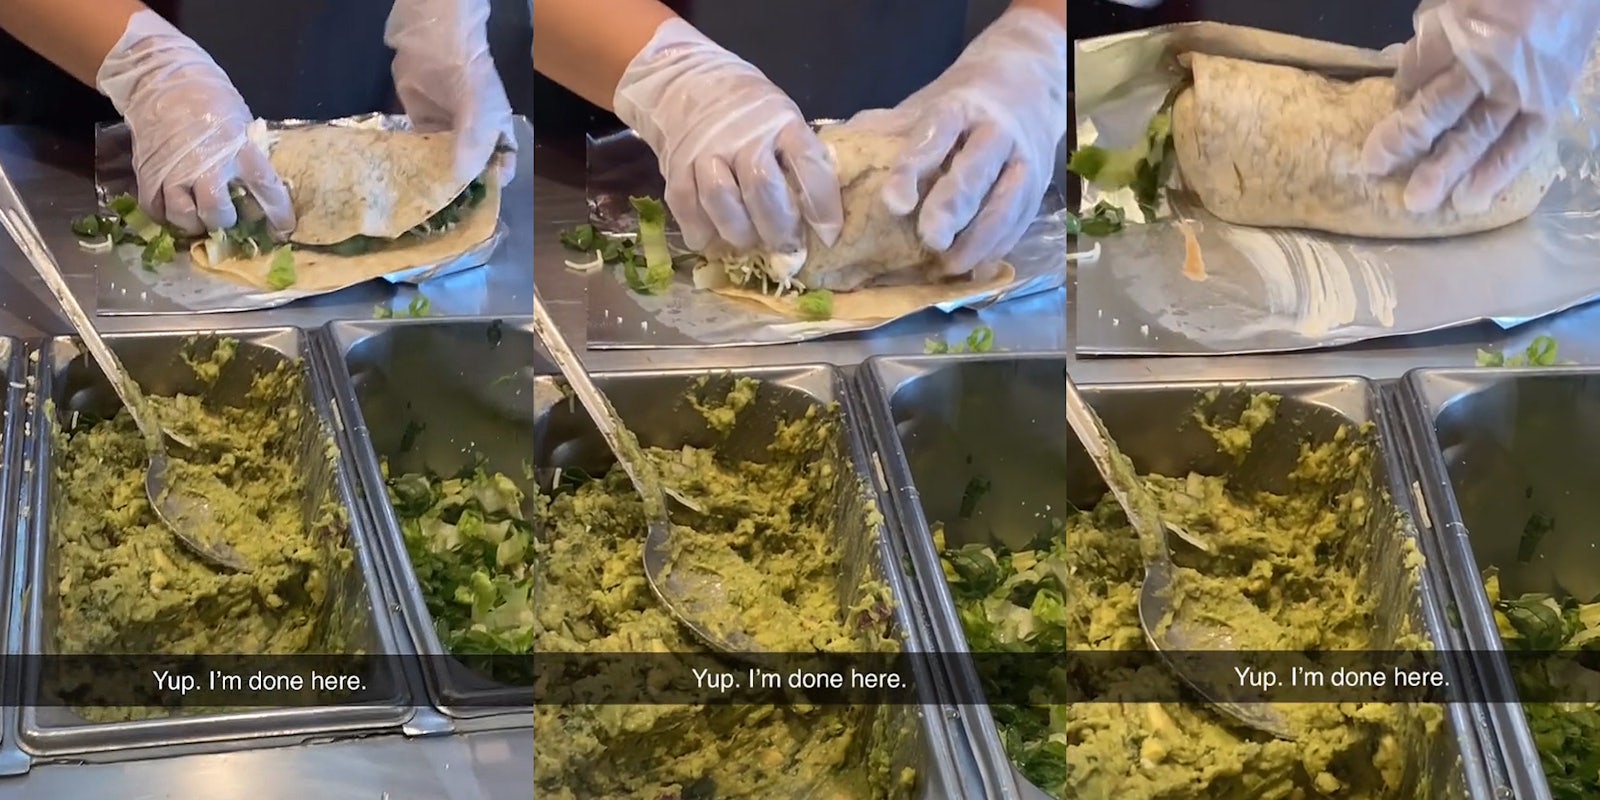 Chipotle worker trying to wrap burrito with lots of filling caption 'Yup. I'm done here.' (l) Chipotle worker trying to wrap burrito with lots of filling caption 'Yup. I'm done here.' (c) Chipotle worker trying to wrap burrito with lots of filling caption 'Yup. I'm done here.' (r)